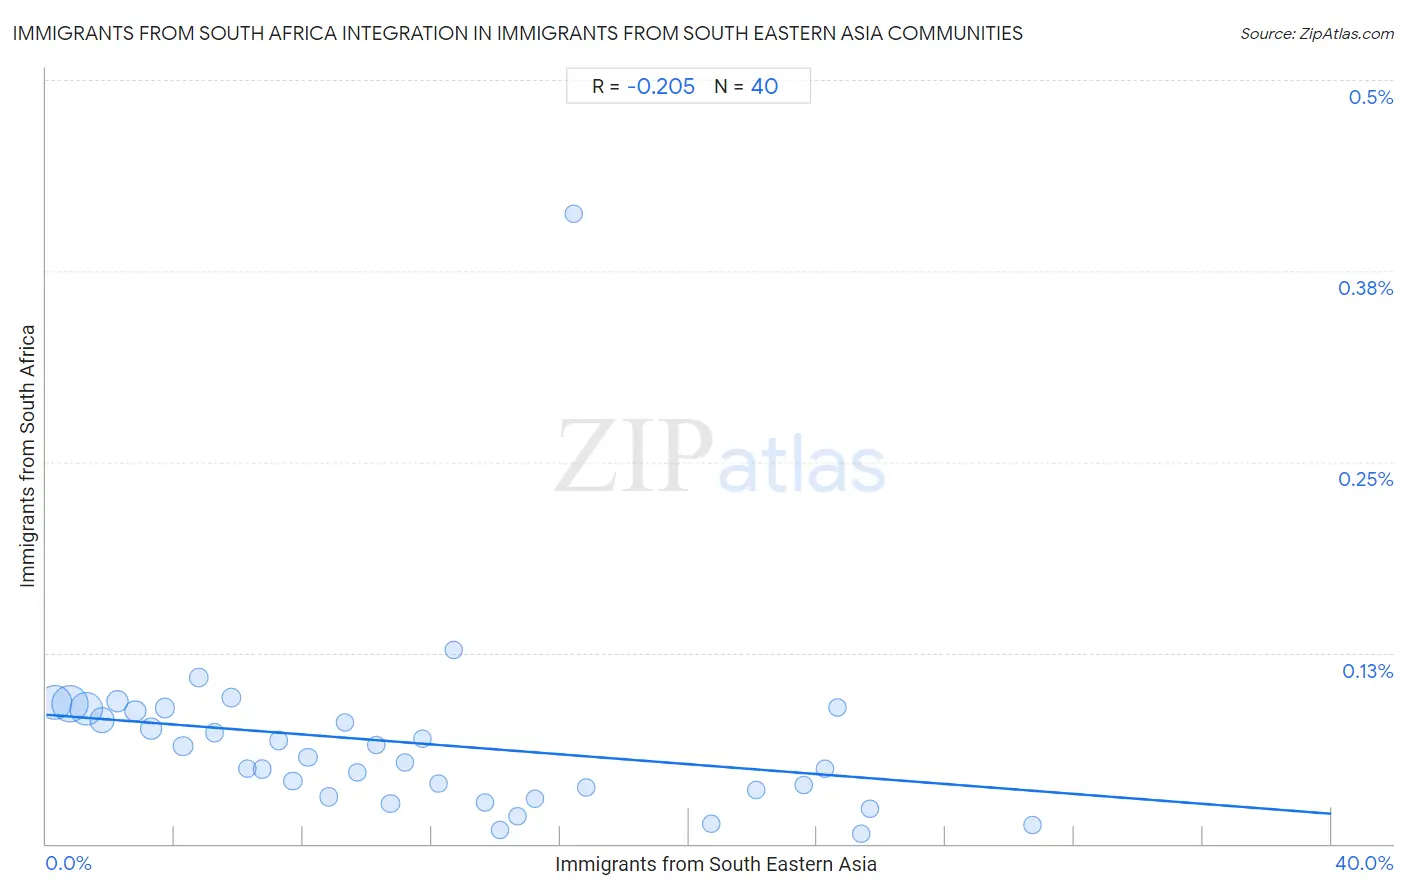 Immigrants from South Eastern Asia Integration in Immigrants from South Africa Communities